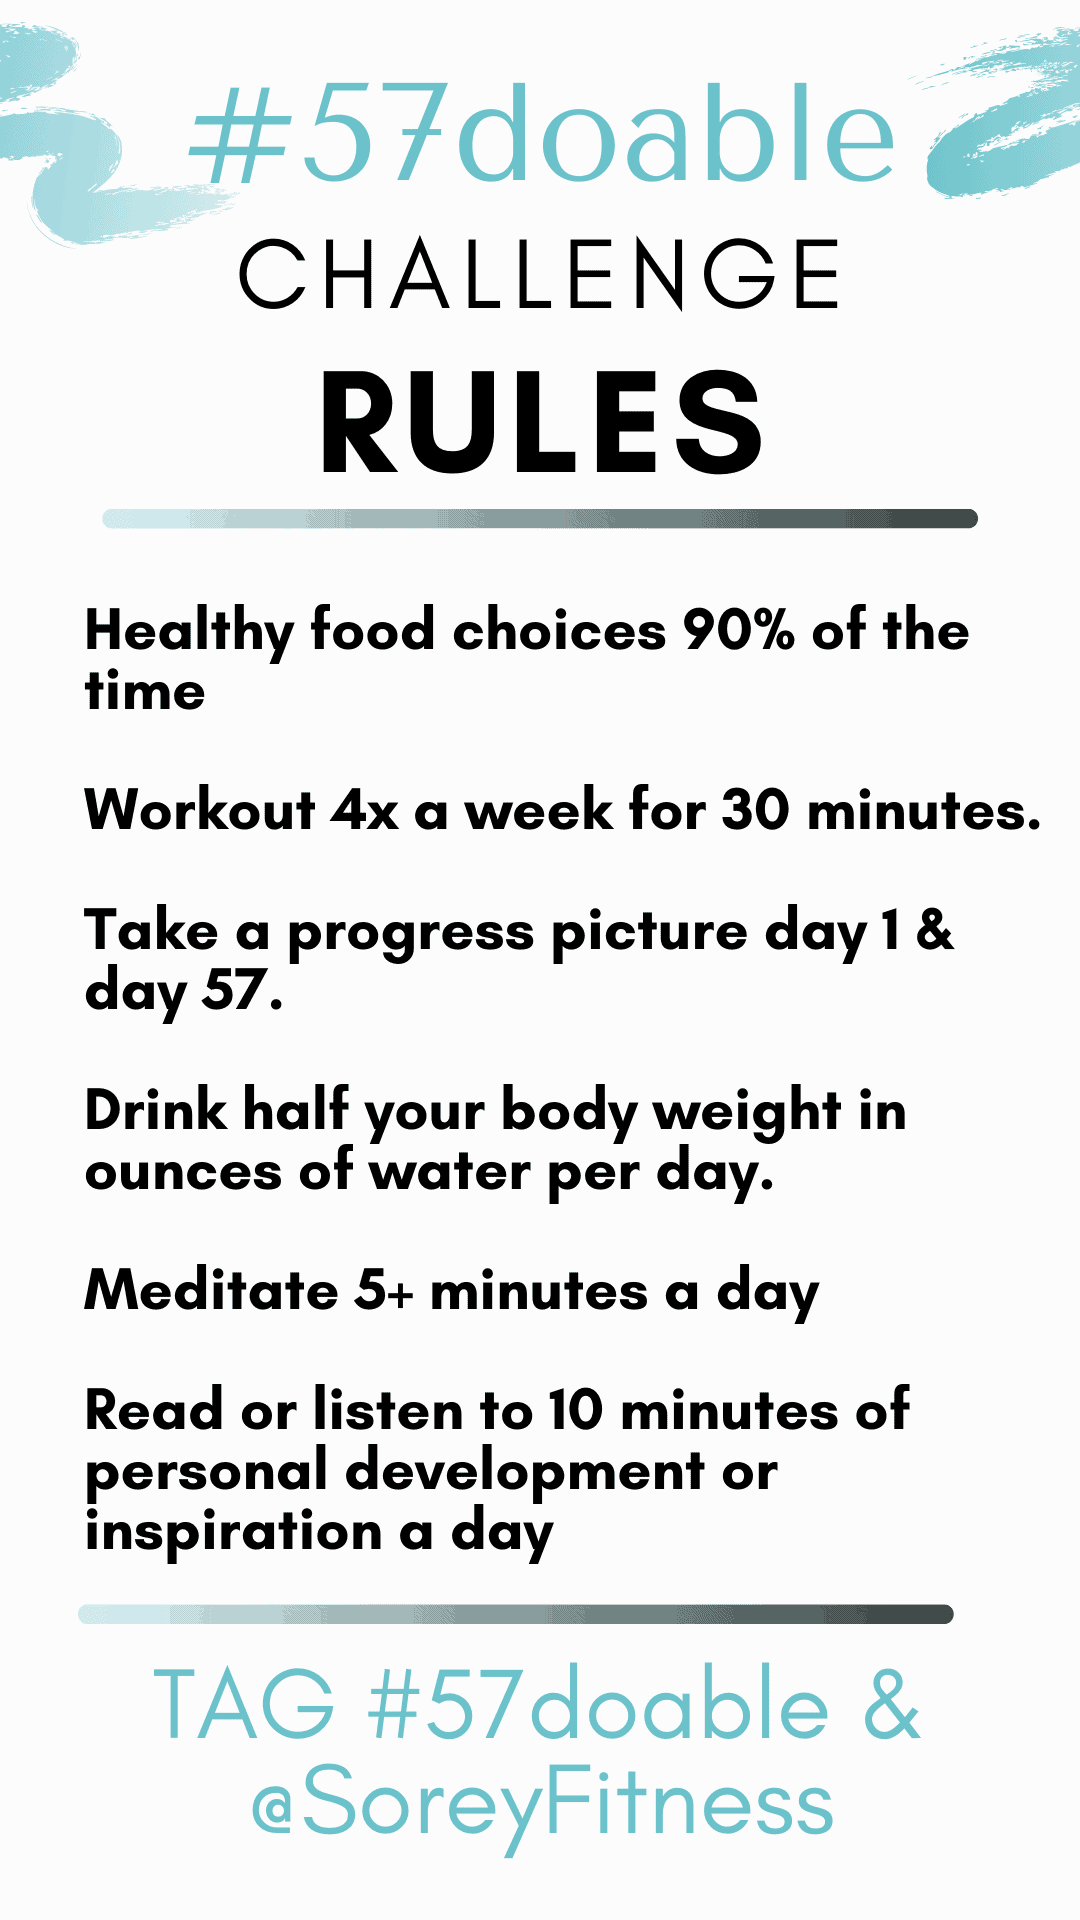 #57doable rules